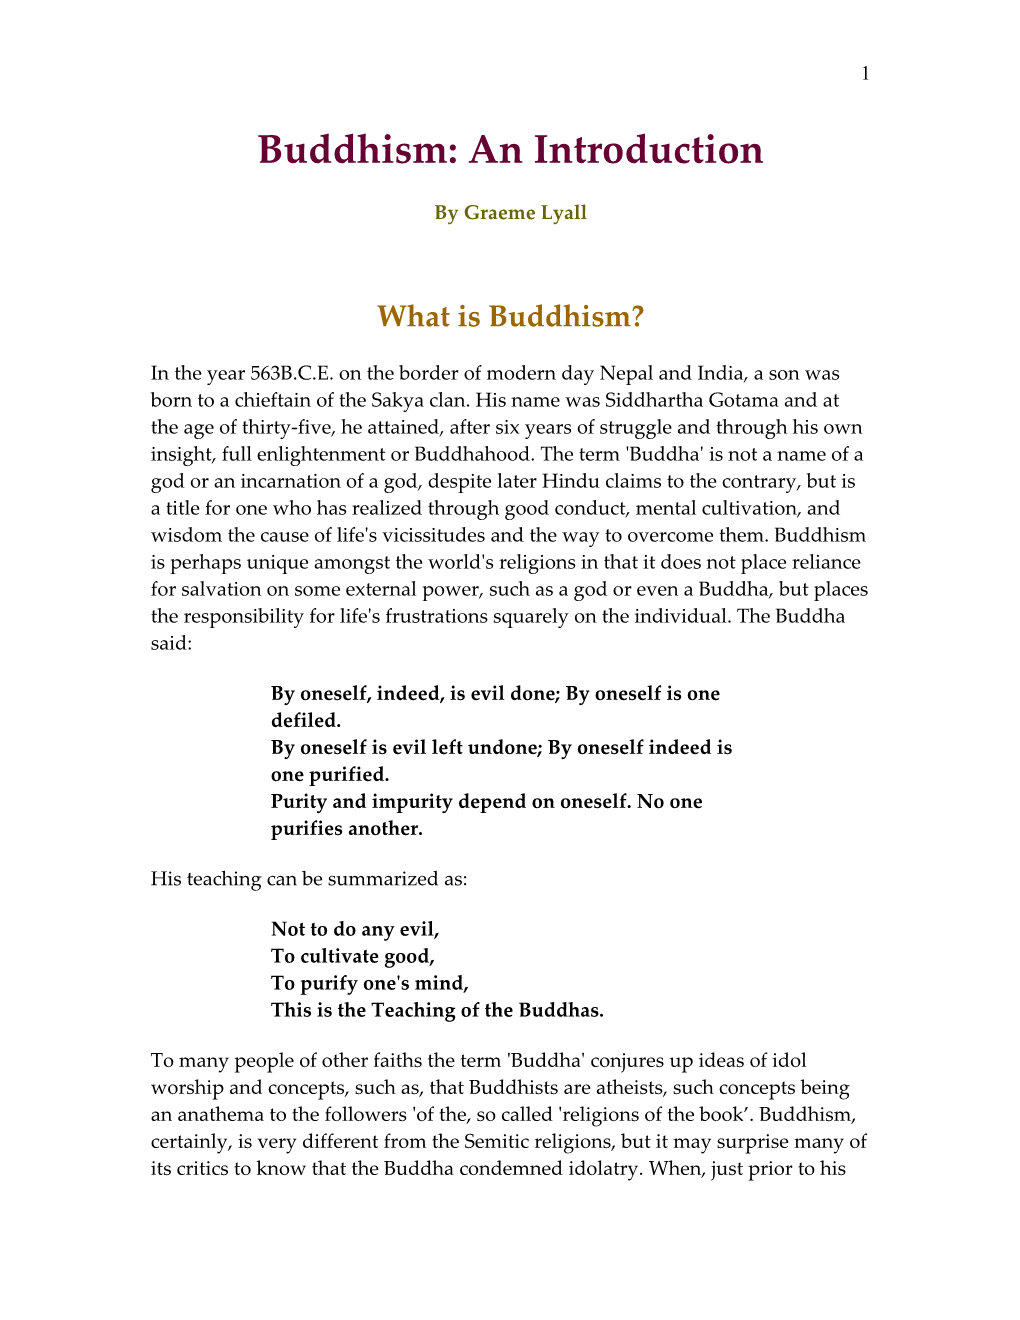 Buddhism: an Introduction